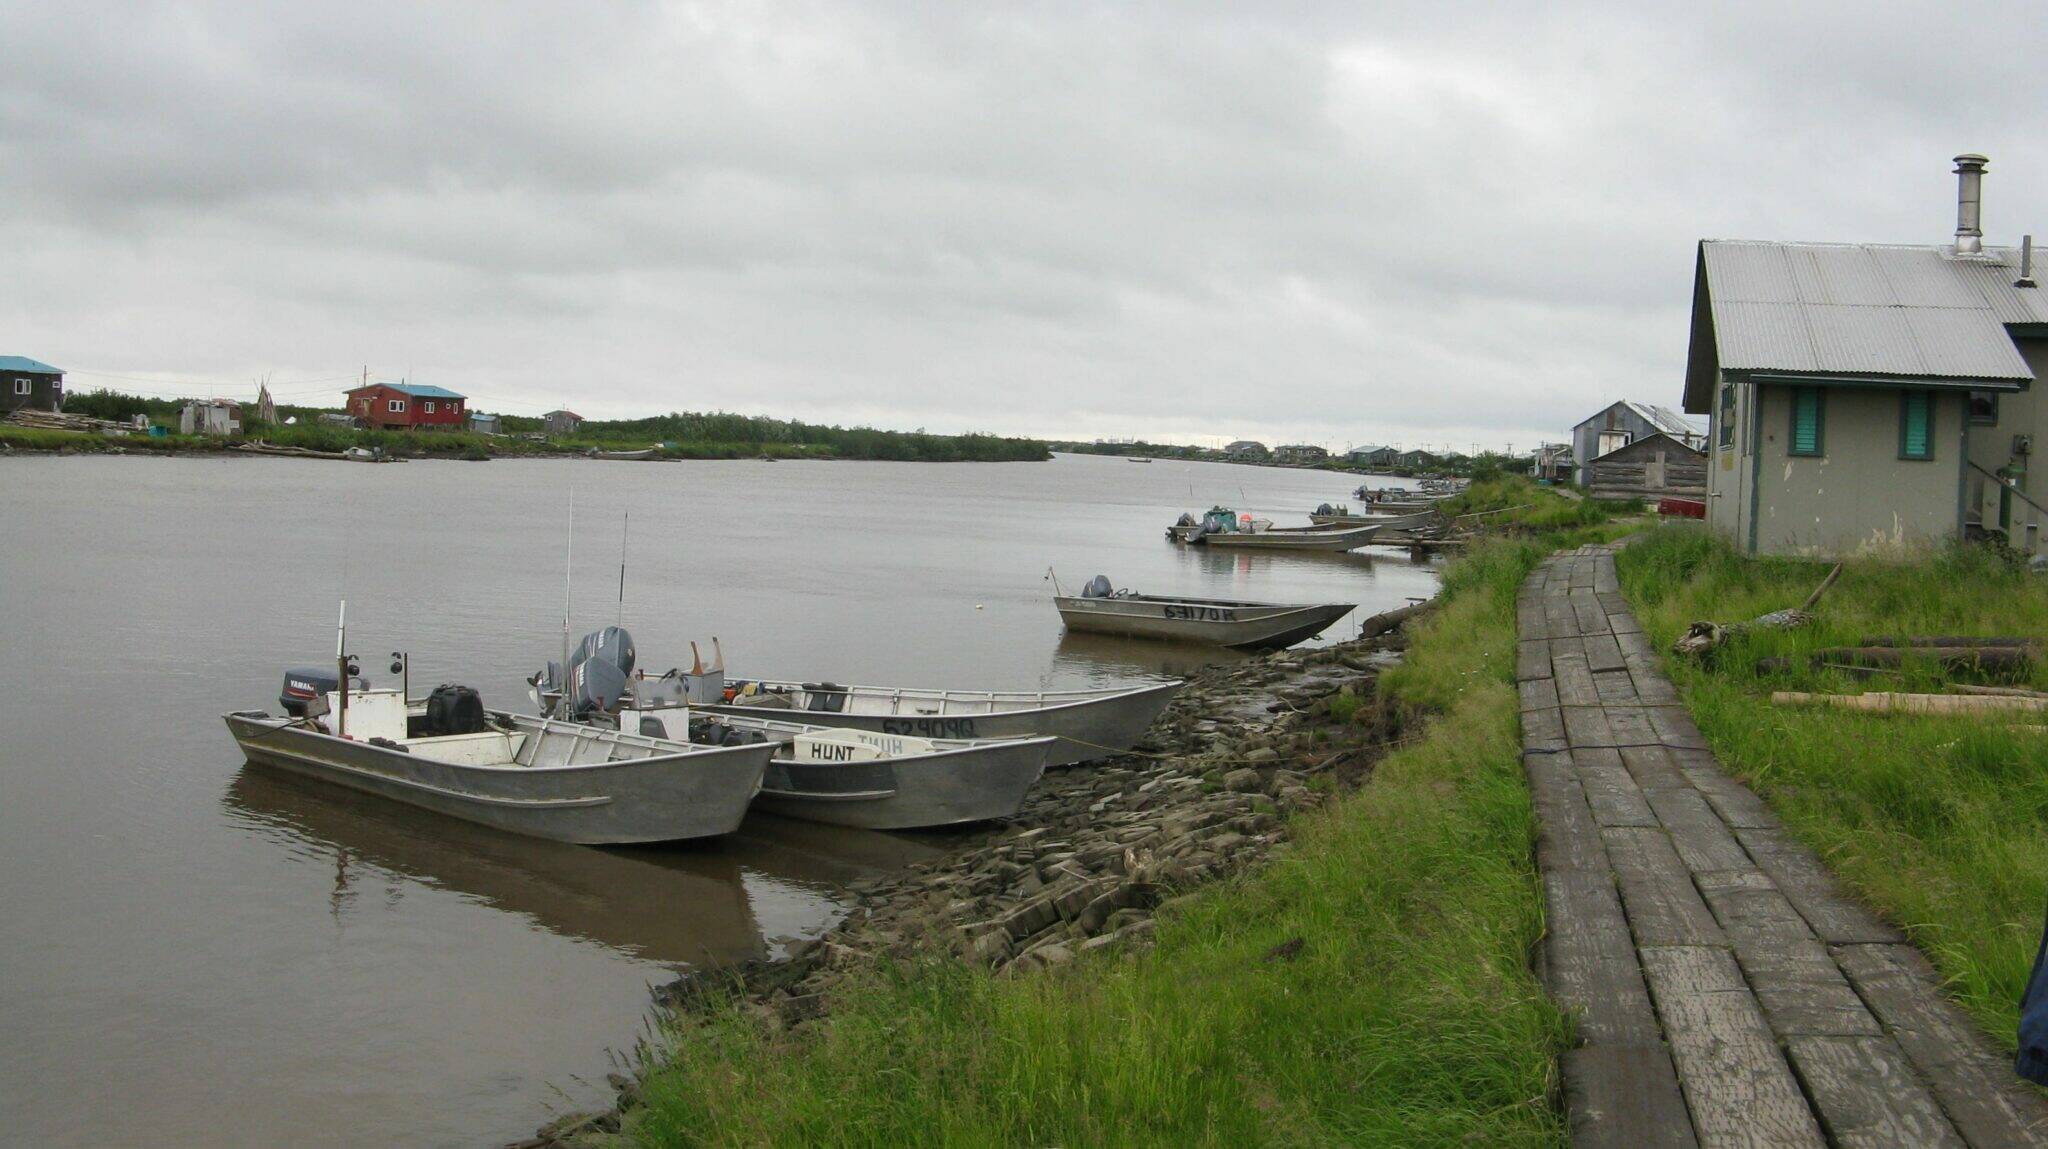 The riverfront in Kotlik, a Yup’ik community of about 600 peole, is seen in 2009. Kotlik, on the north end of the Yukon-Kuskokwim Delta, is one of the communities in the Kusilvak Census Area. A new study published in the Lancet found that Alaska Natives in the Kusilvak Census Area have the nation’s highest rate of death from intentional self-harm or interpersonal violence. (Photo provided by the Alaska Division of Community and Regional Affairs)